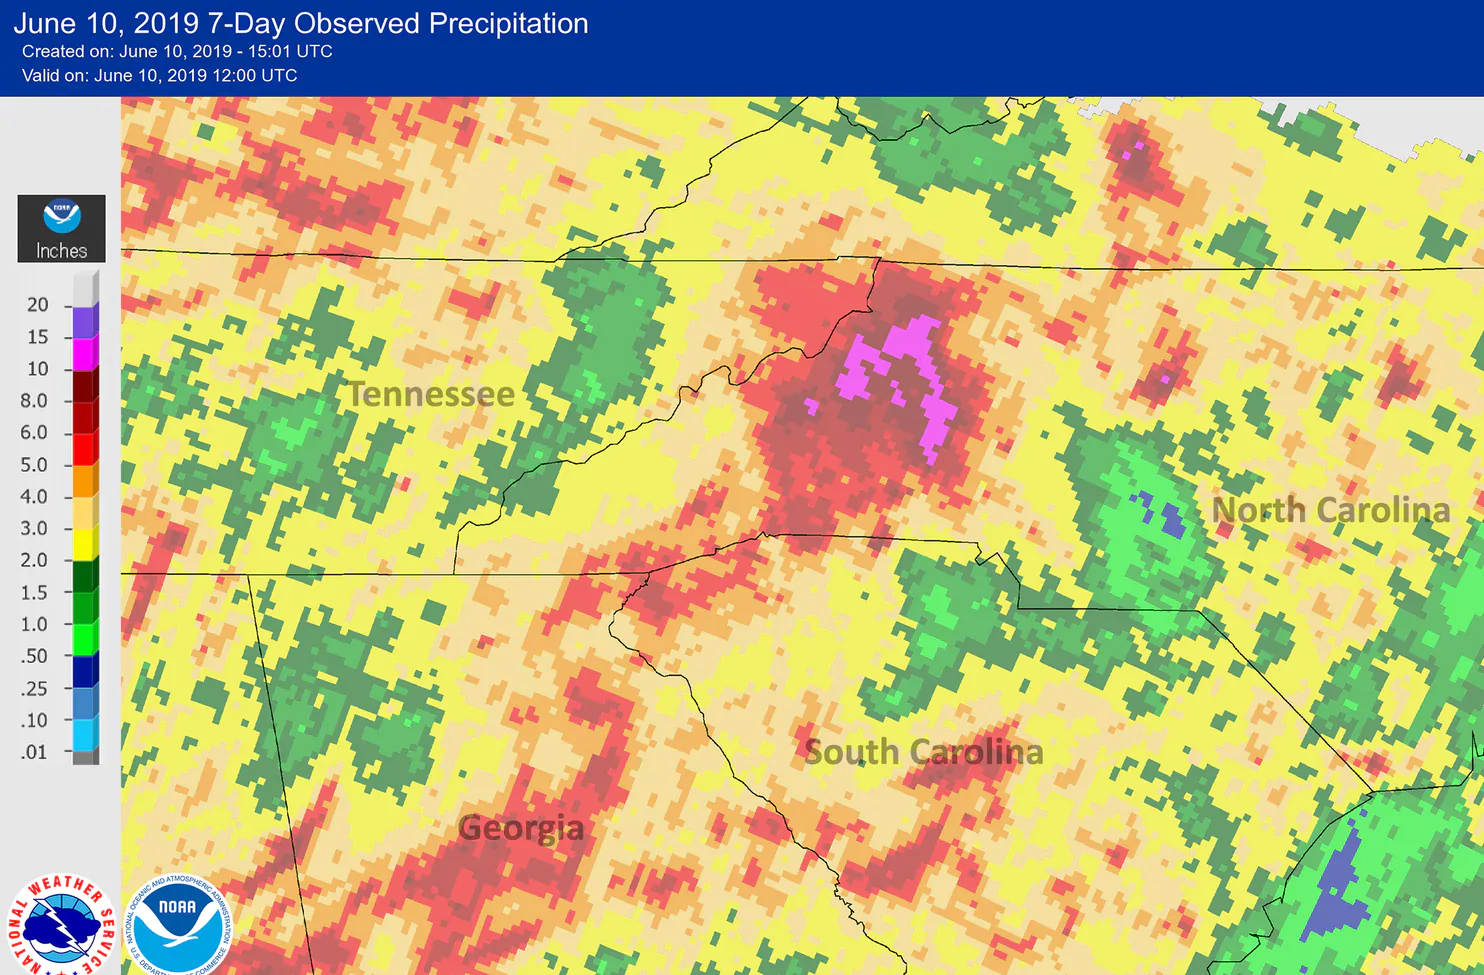 10 to 12 inches of rain fell in parts of North Carolina over the weekend. (National Weather Service)